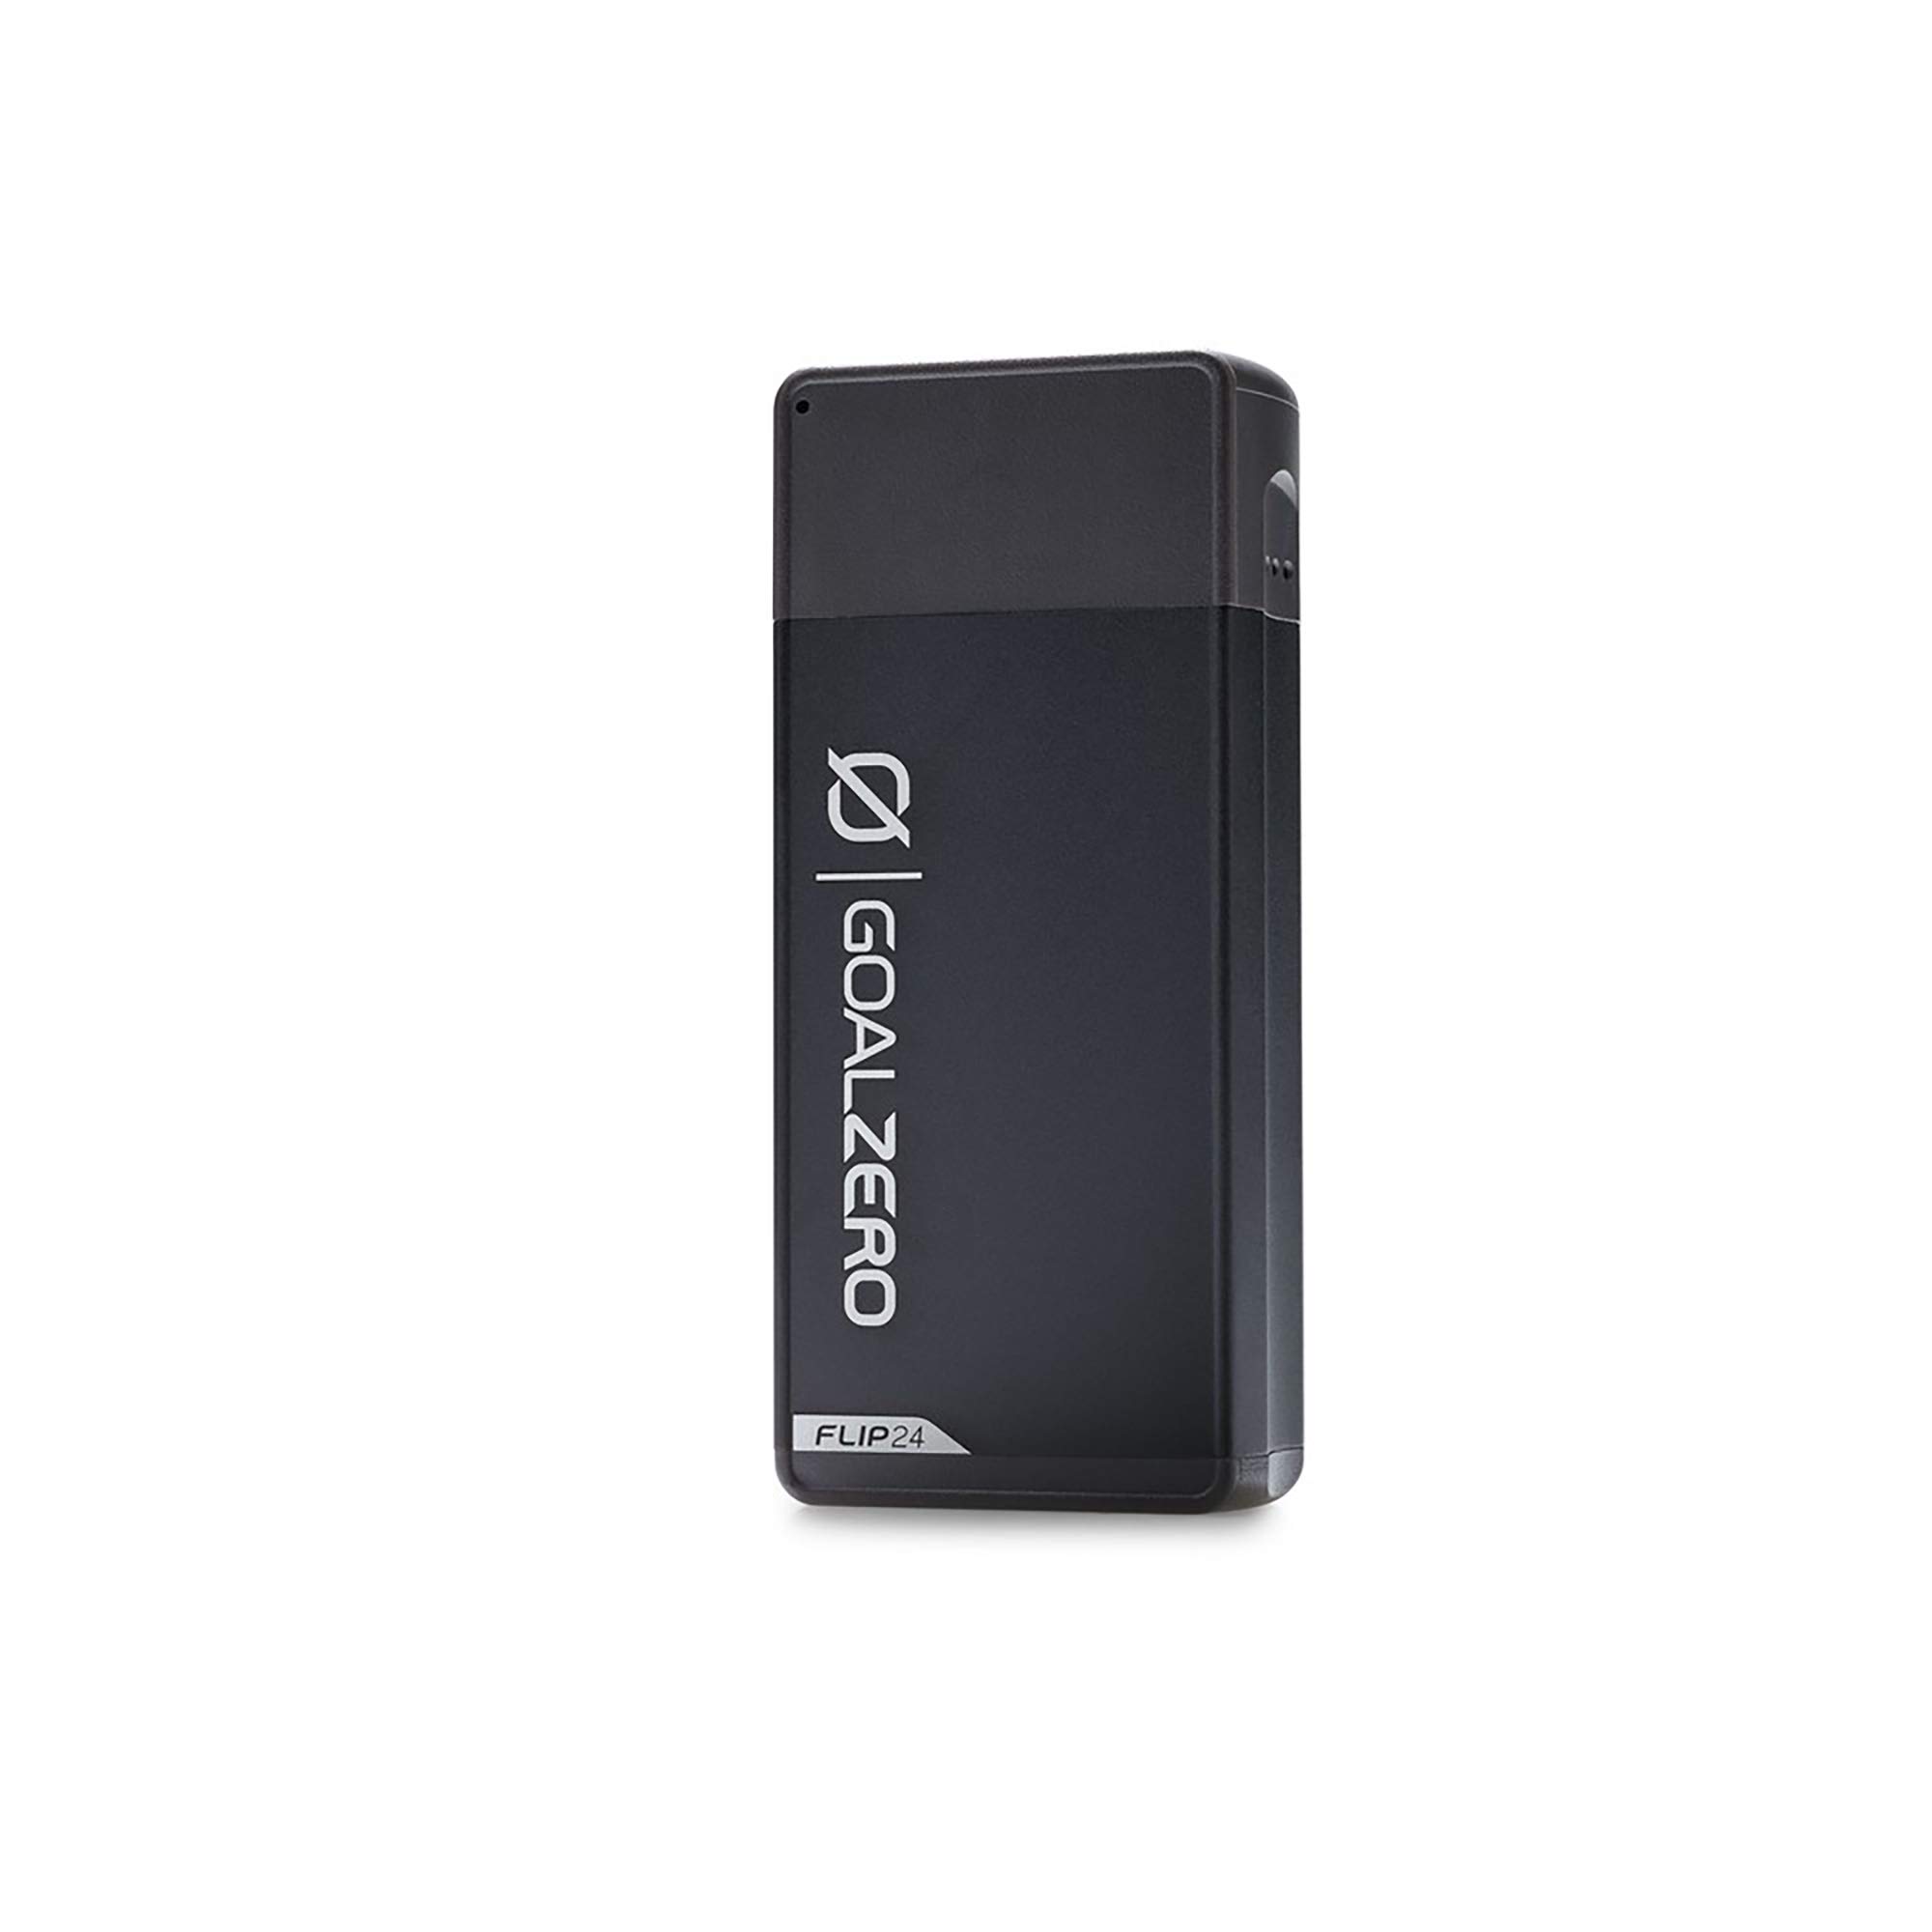 Goal Zero Flip 24 Portable Phone Charger, USB Battery Bank for Travel and Emergency Use - Black